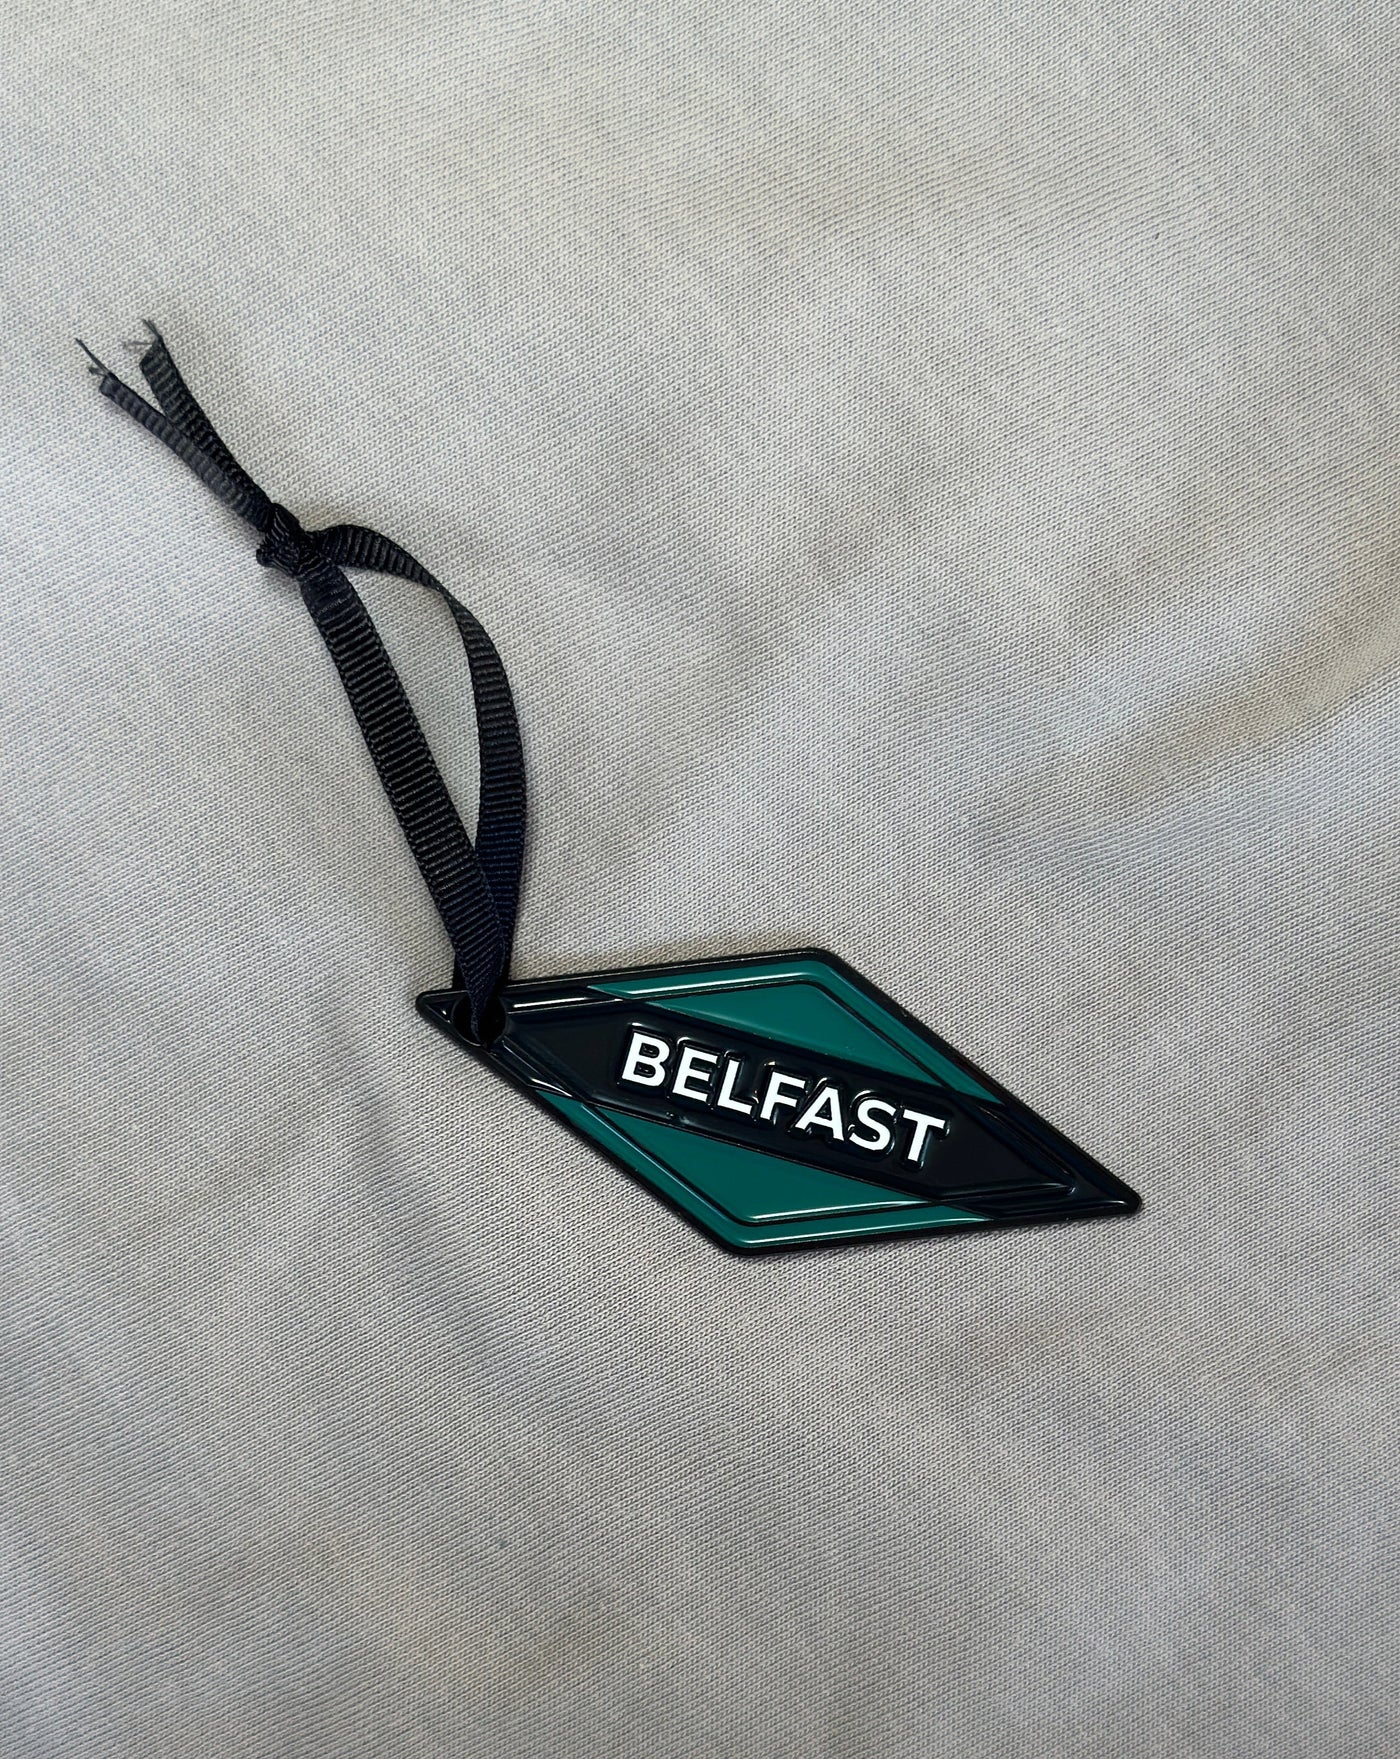 Belfast Sign | Born and Bred Decoration